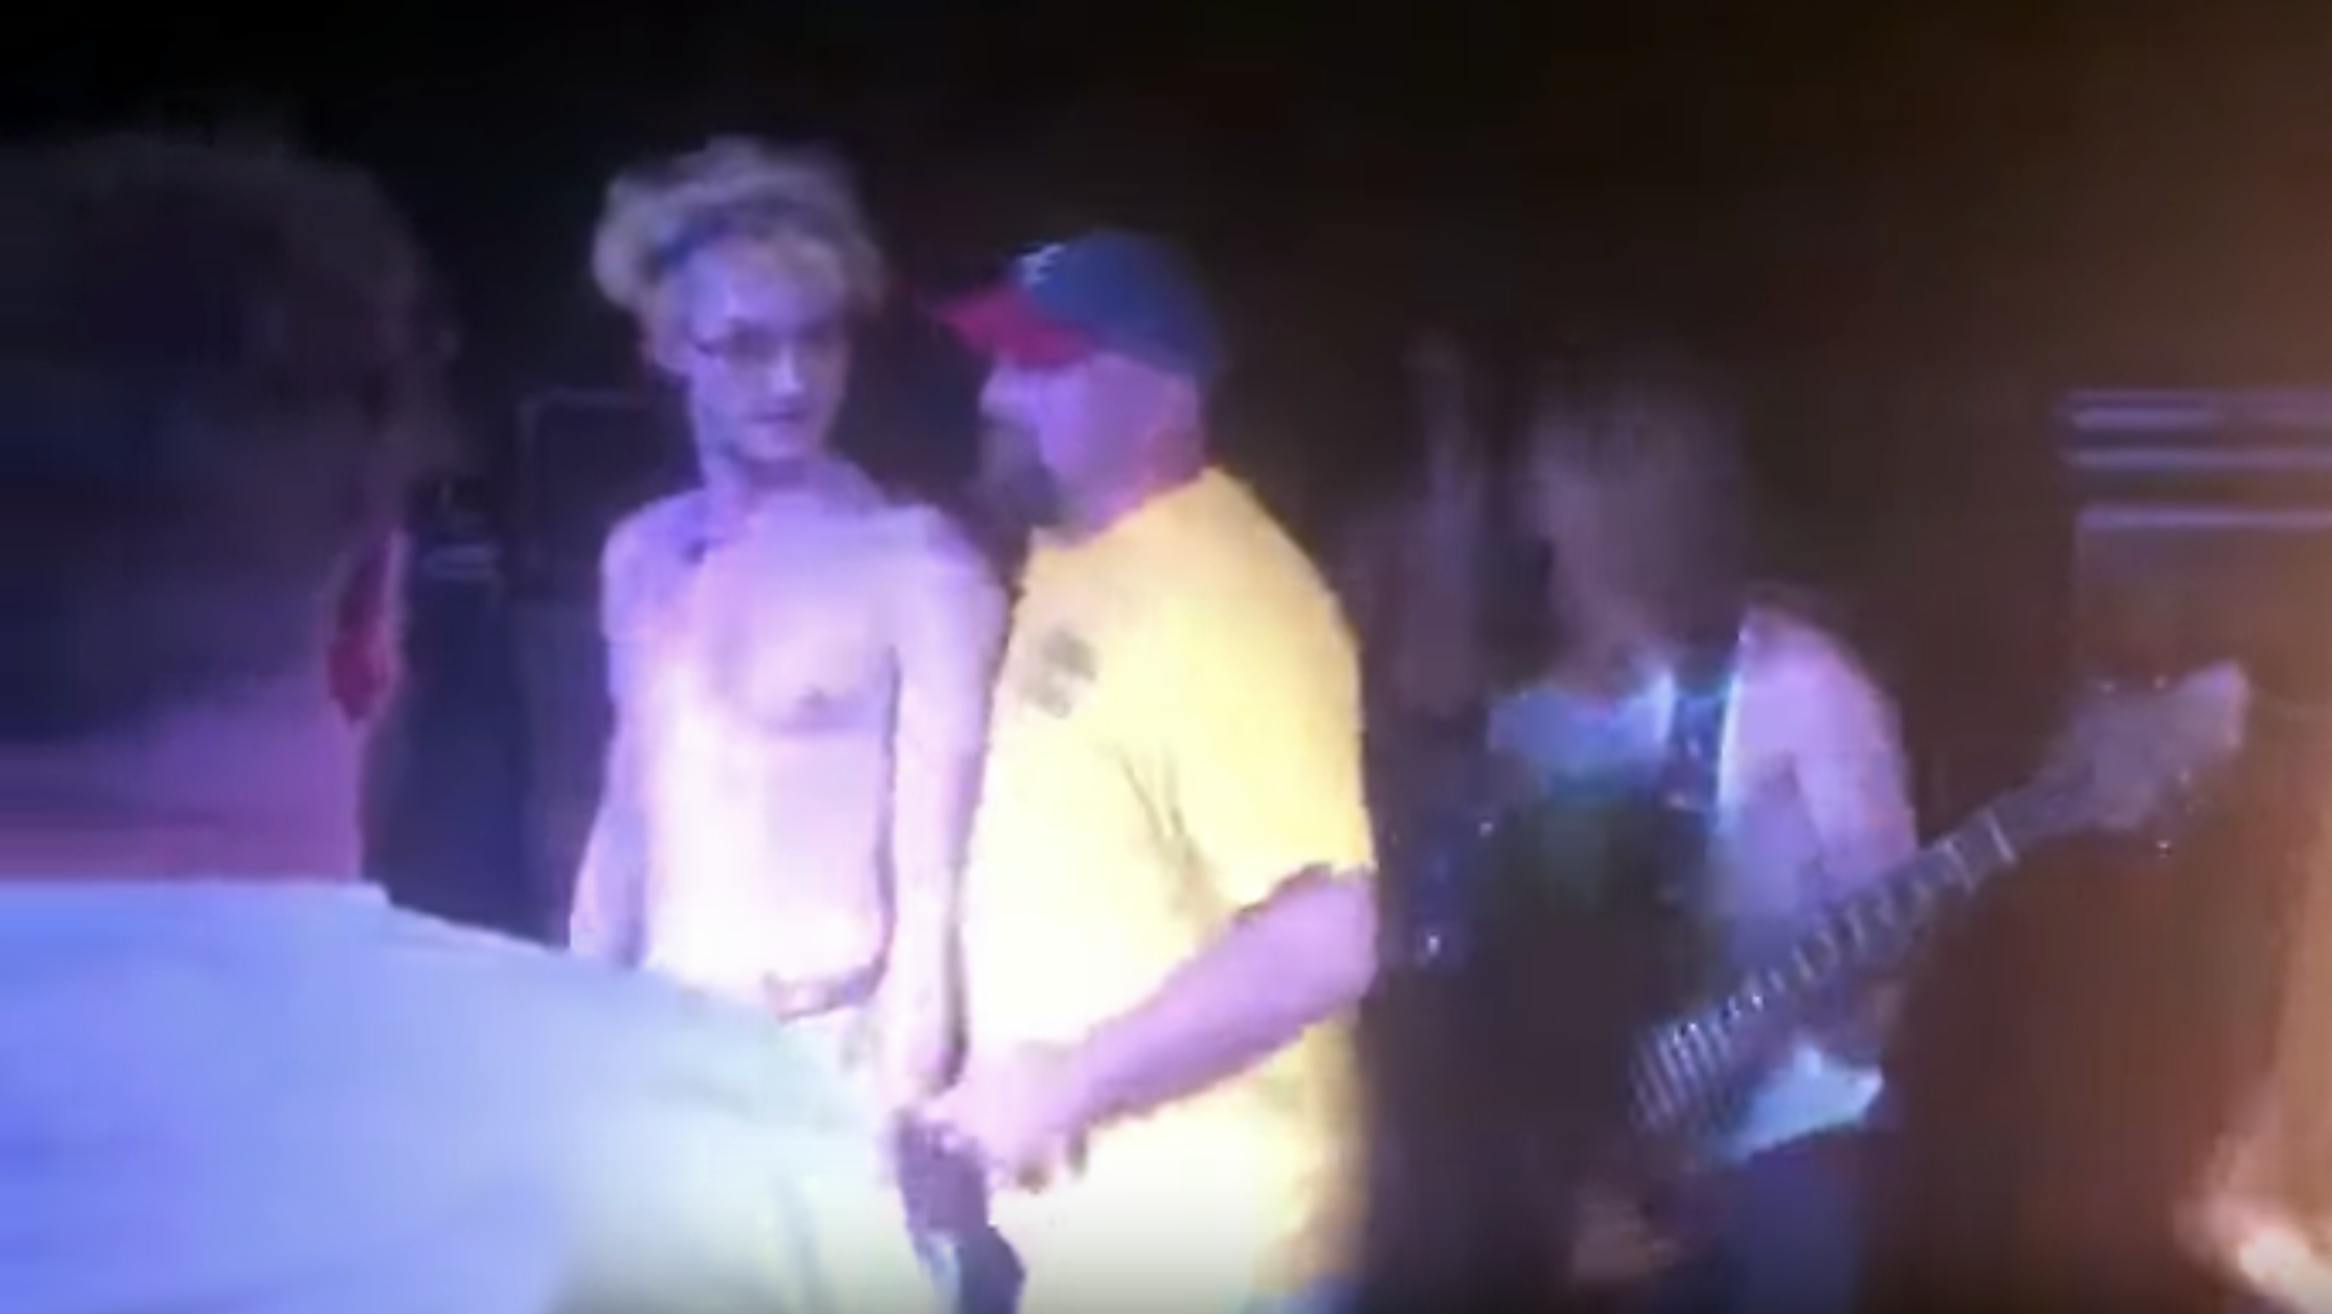 VIDEO: Tallah Frontman Arrested On First Night Of Tour, Currently Missing